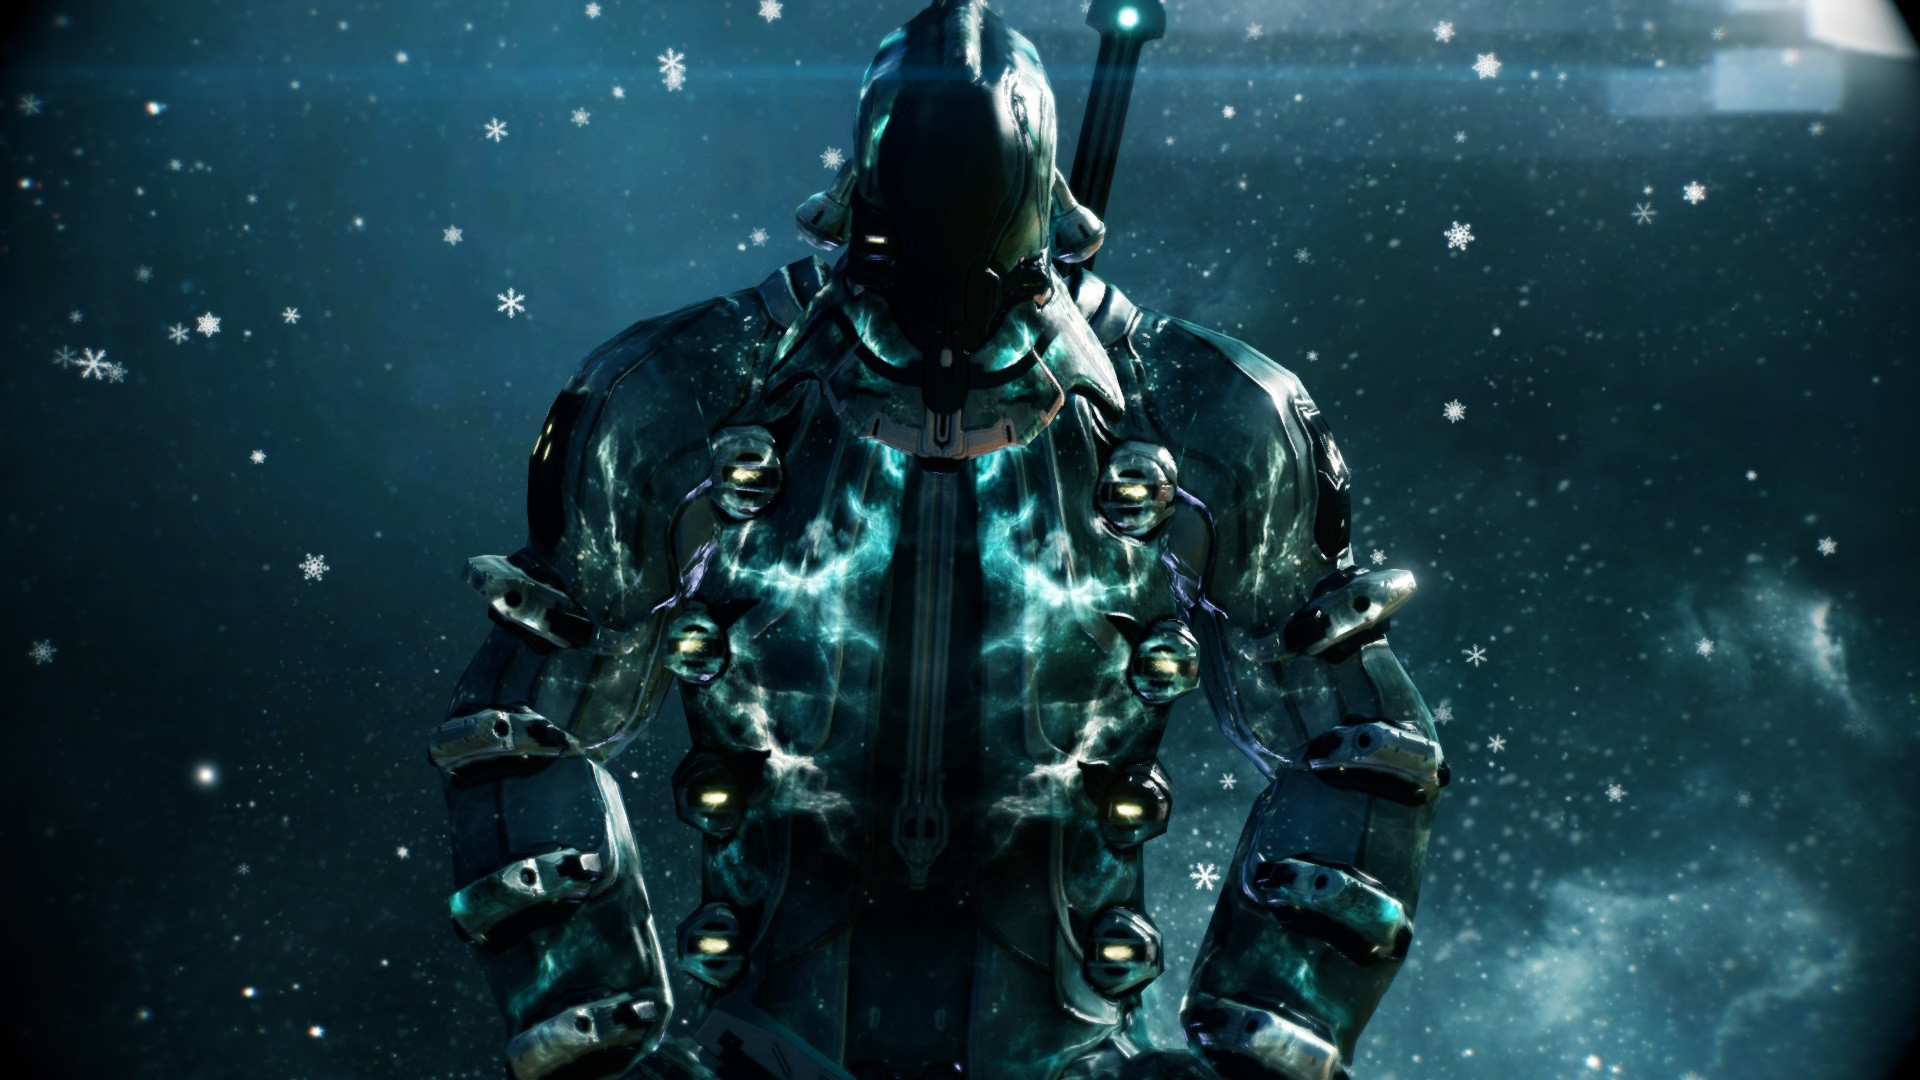 Phased Vauban Makes A Good Wallpaper General Discussion